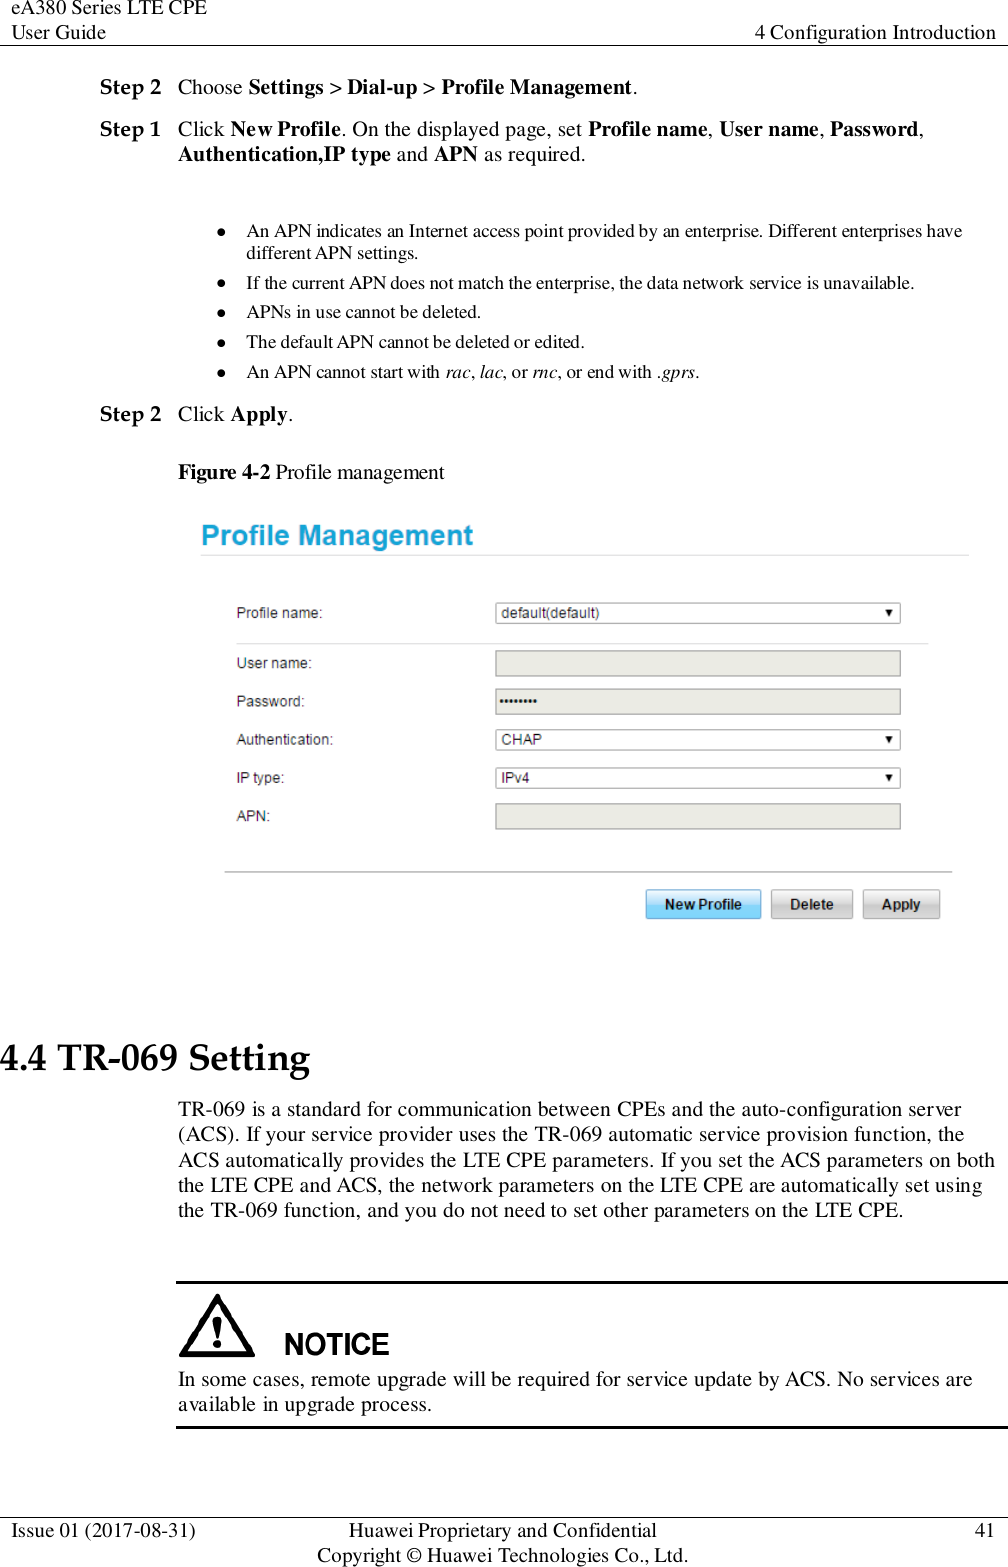 eA380 Series LTE CPE User Guide 4 Configuration Introduction  Issue 01 (2017-08-31) Huawei Proprietary and Confidential                                     Copyright © Huawei Technologies Co., Ltd. 41  Step 2 Choose Settings &gt; Dial-up &gt; Profile Management. Step 1 Click New Profile. On the displayed page, set Profile name, User name, Password, Authentication,IP type and APN as required. NOTE  An APN indicates an Internet access point provided by an enterprise. Different enterprises have different APN settings.  If the current APN does not match the enterprise, the data network service is unavailable.  APNs in use cannot be deleted.  The default APN cannot be deleted or edited.  An APN cannot start with rac, lac, or rnc, or end with .gprs. Step 2 Click Apply. Figure 4-2 Profile management  4.4 TR-069 Setting TR-069 is a standard for communication between CPEs and the auto-configuration server (ACS). If your service provider uses the TR-069 automatic service provision function, the ACS automatically provides the LTE CPE parameters. If you set the ACS parameters on both the LTE CPE and ACS, the network parameters on the LTE CPE are automatically set using the TR-069 function, and you do not need to set other parameters on the LTE CPE.   In some cases, remote upgrade will be required for service update by ACS. No services are available in upgrade process.  